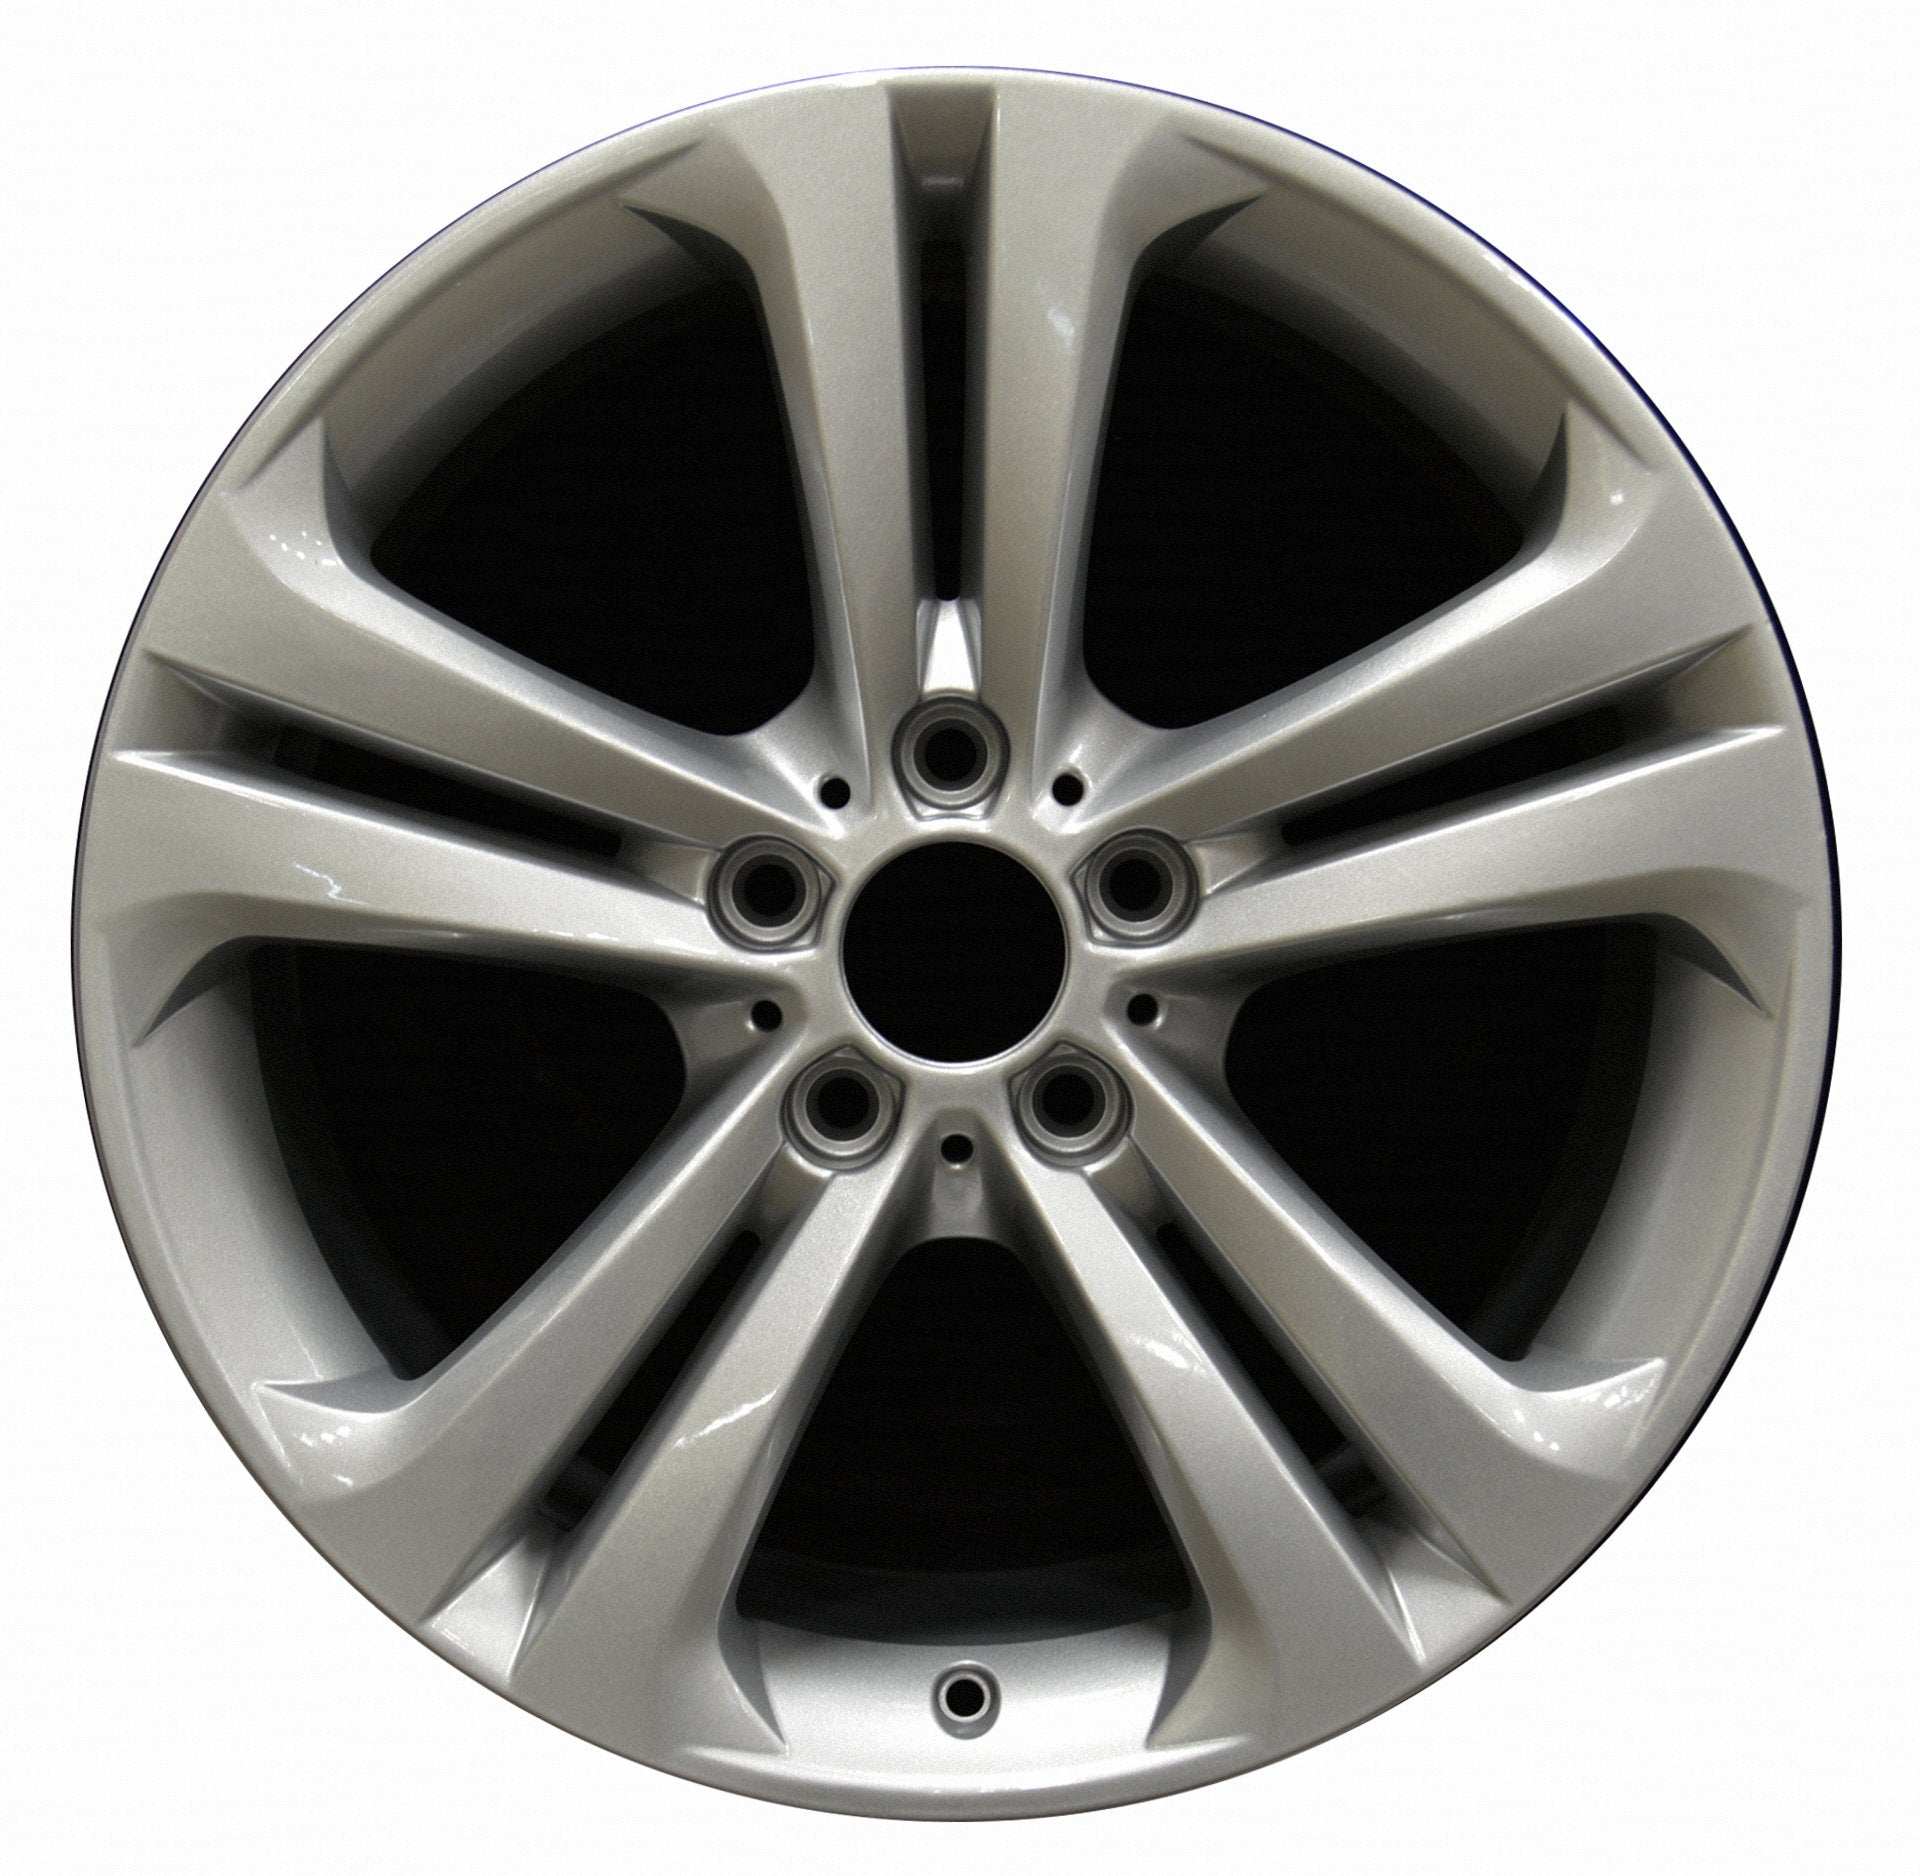 BMW 320i  2012, 2013, 2014, 2015 Factory OEM Car Wheel Size 19x8.5 Alloy WAO.71547RE.PS01.FF